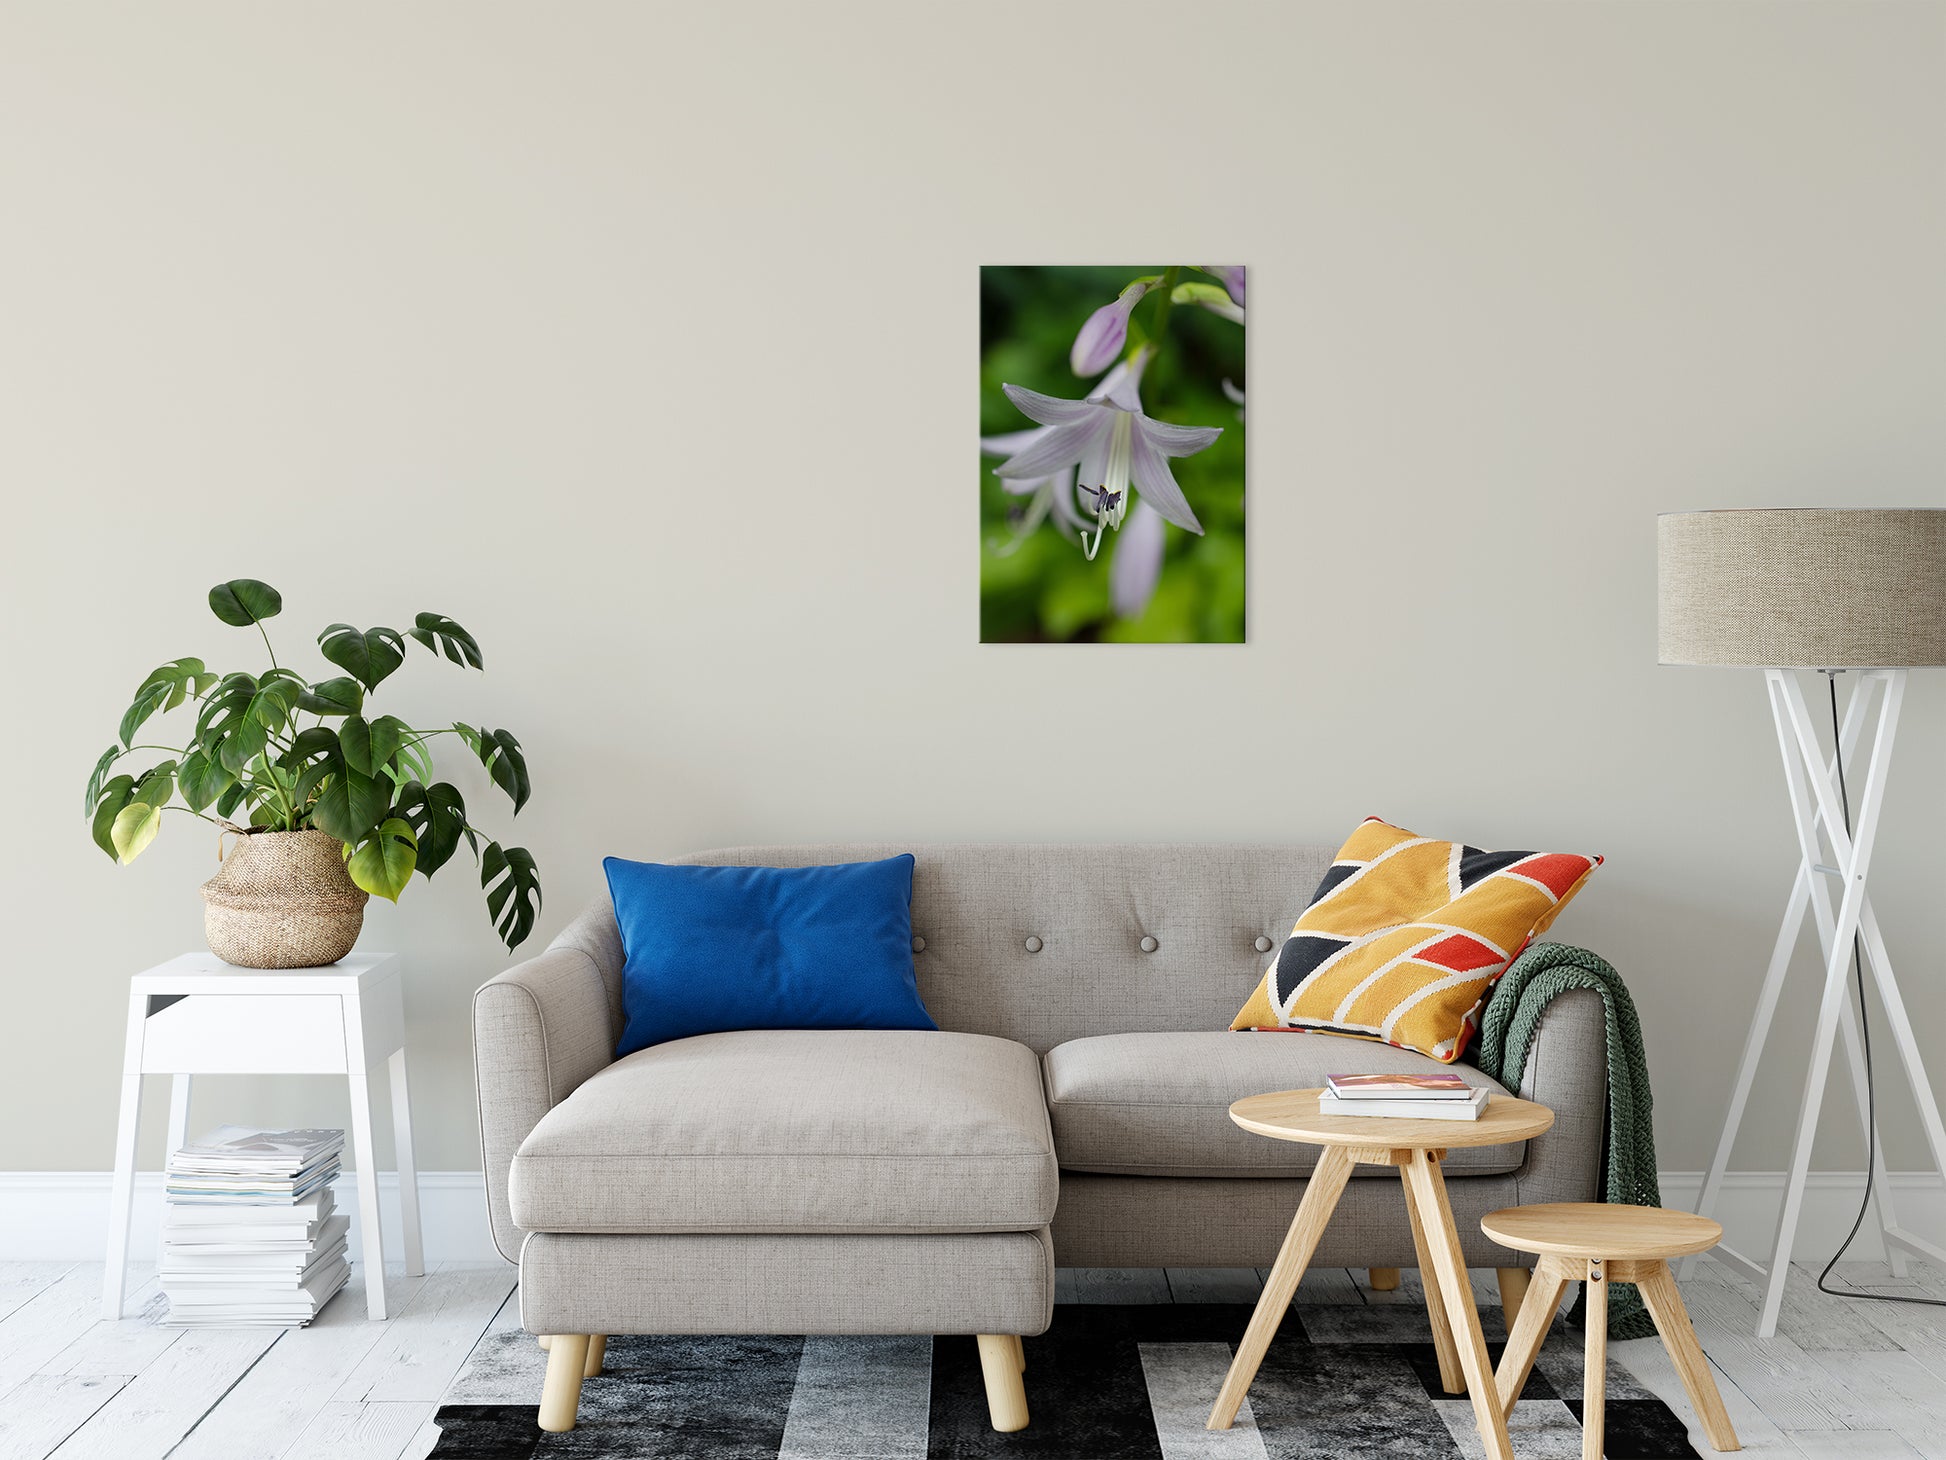 Hosta Bloom Nature / Floral Photo Fine Art Canvas Wall Art Prints 20" x 24" - PIPAFINEART